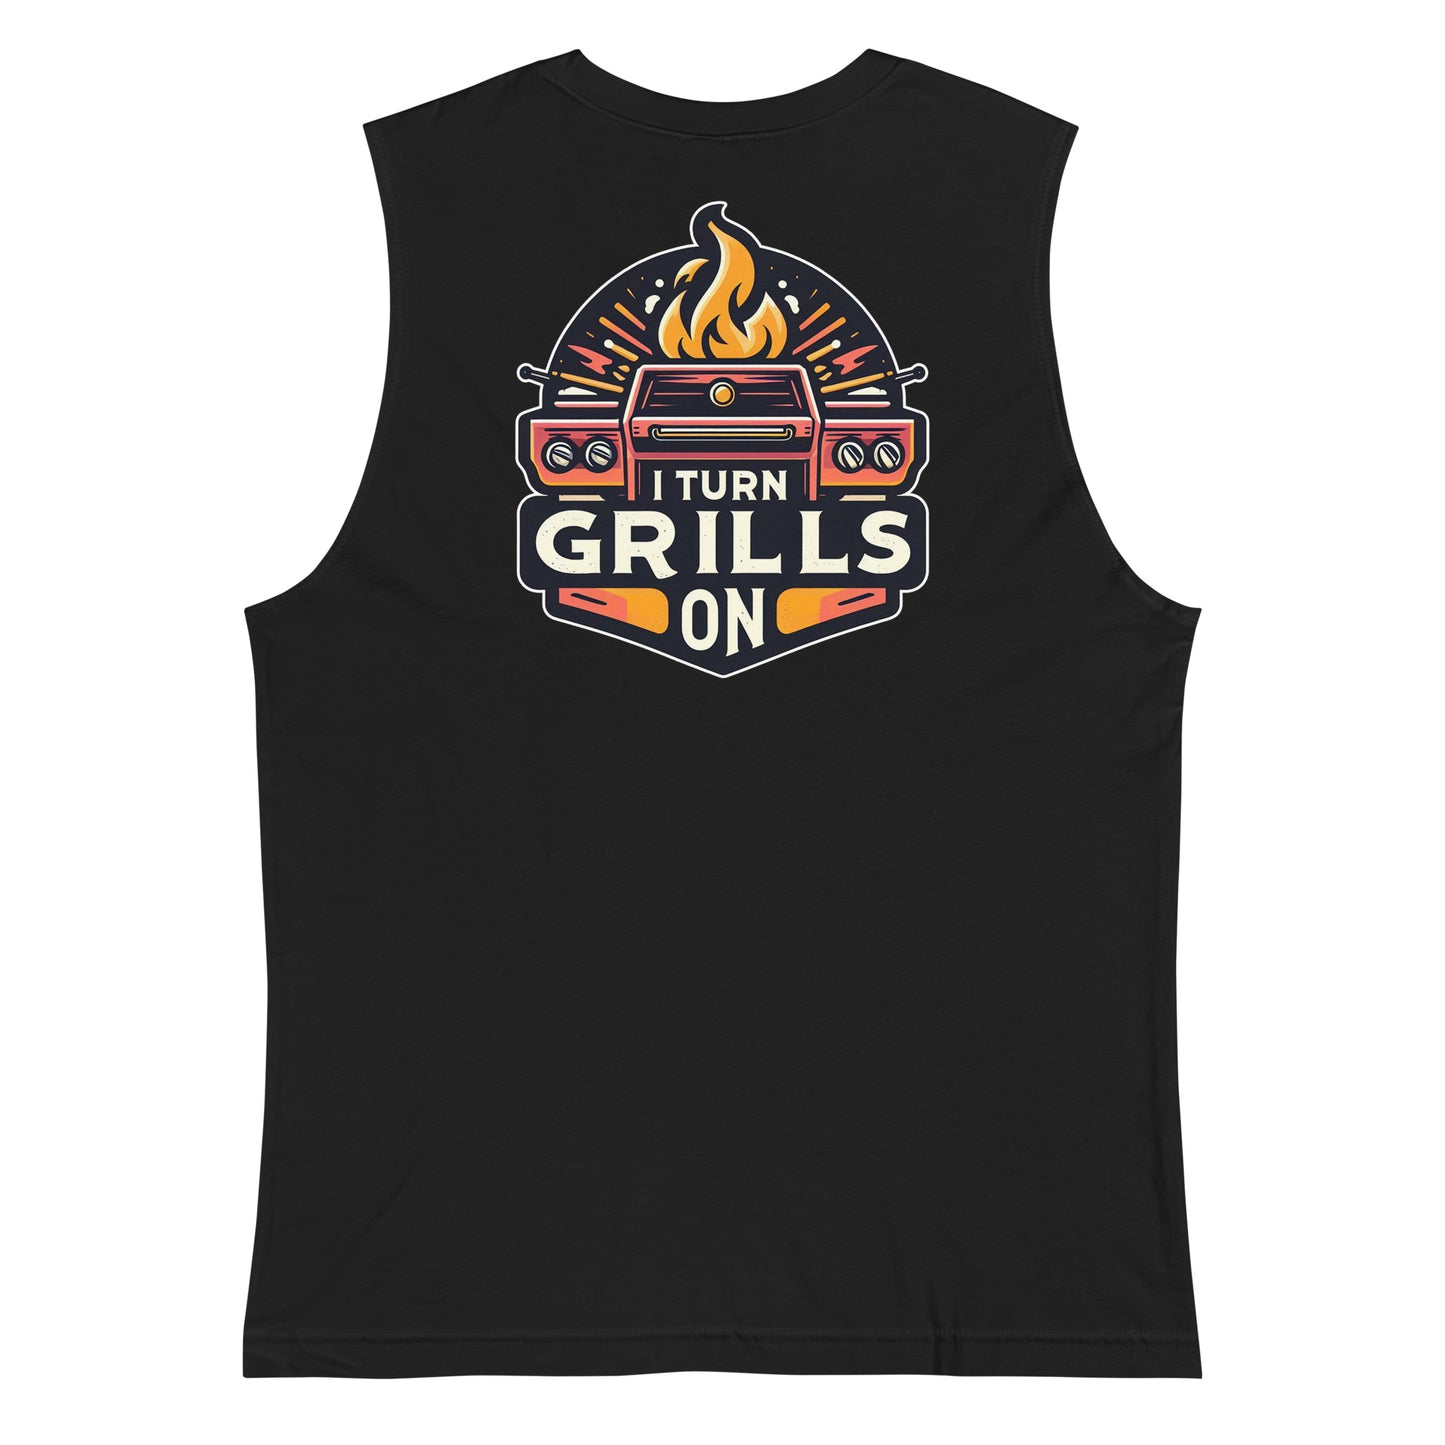 Grills On! V2 Muscle Tee